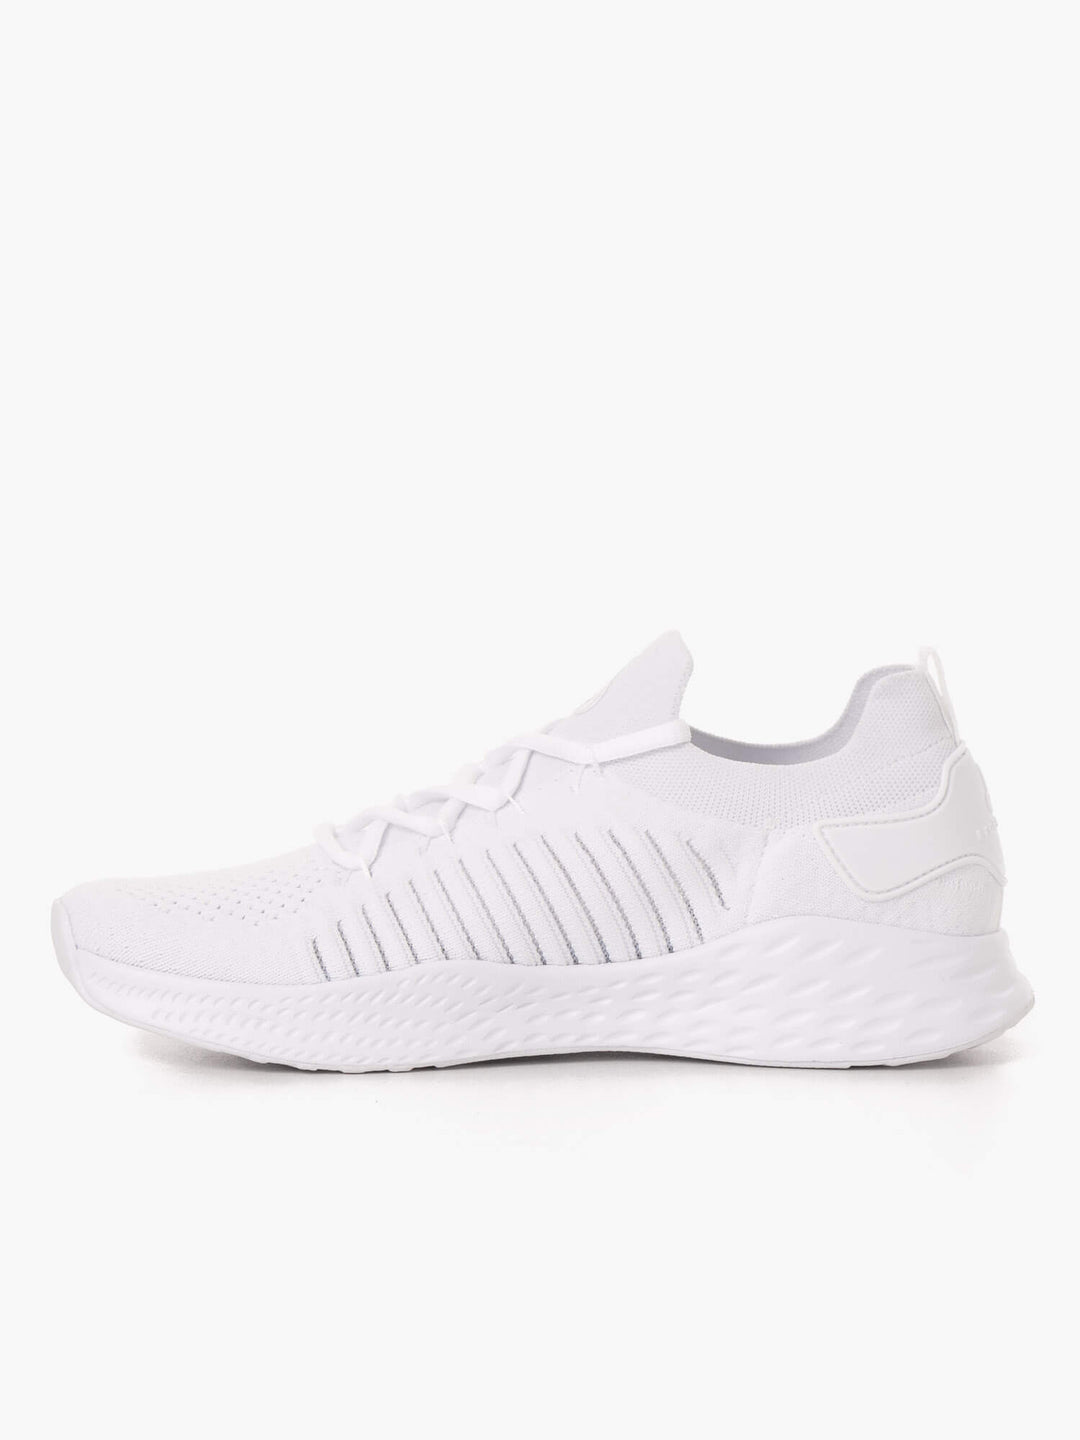 Womens Flylyte Trainer - White Shoes Ryderwear 